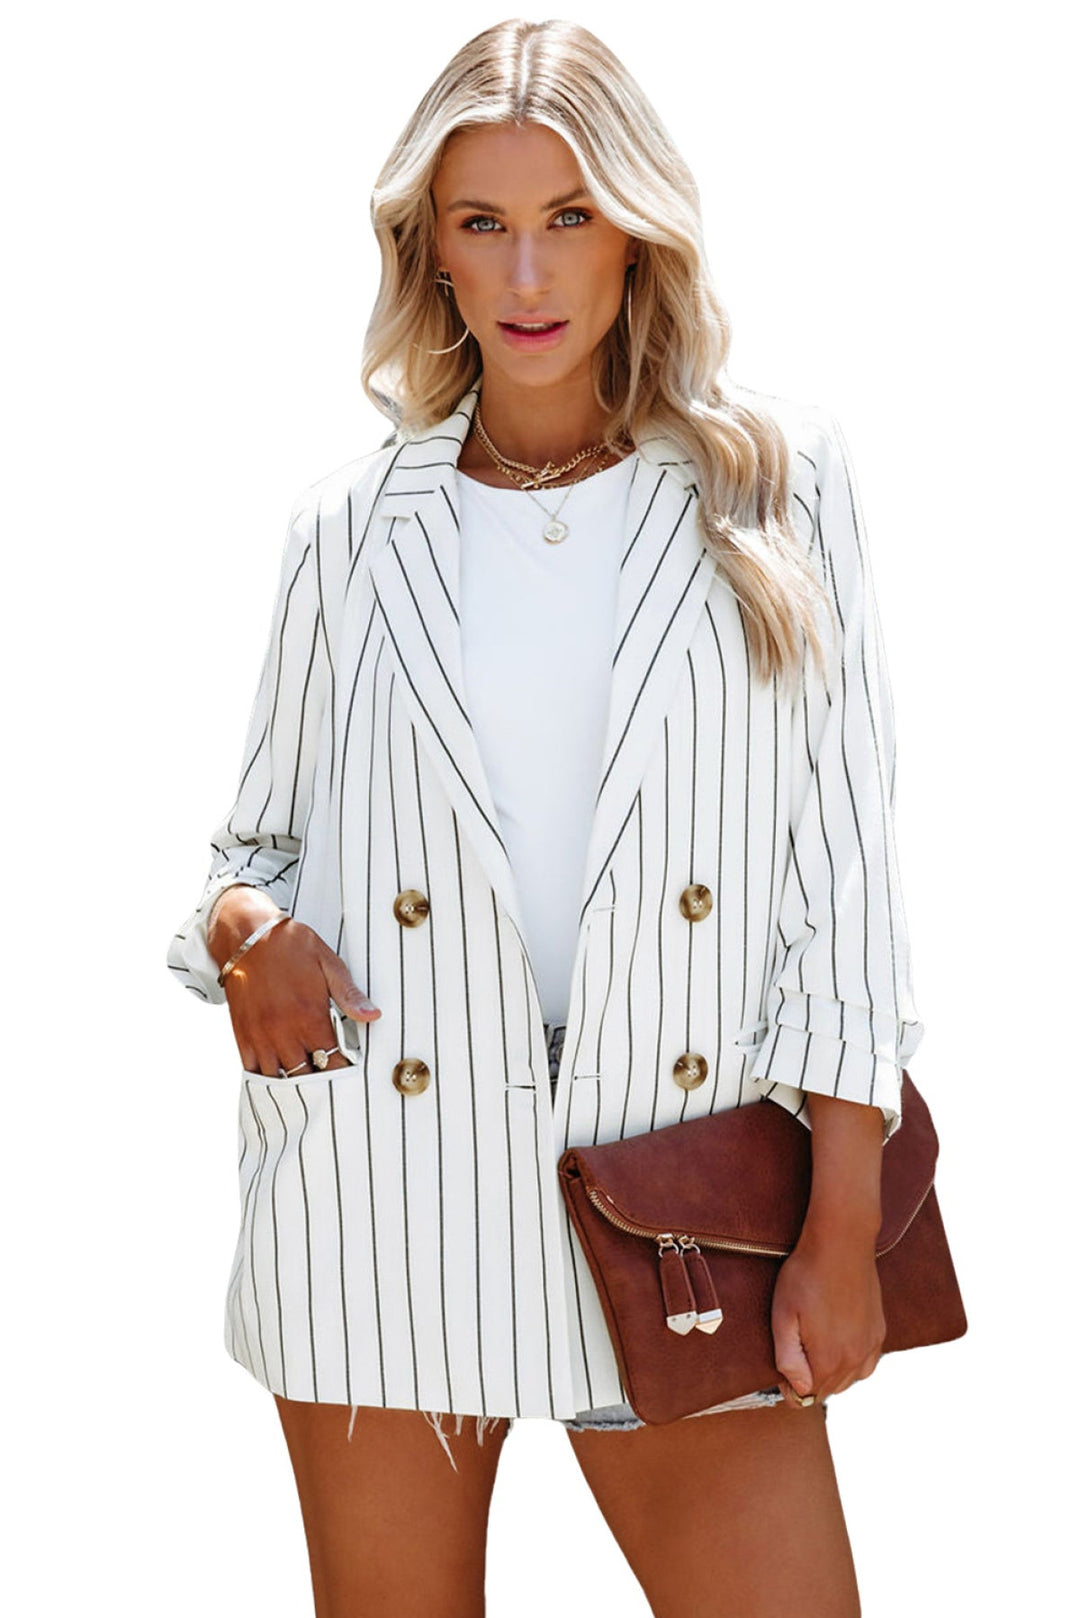 White Double-Breasted Striped Blazer with Pocket